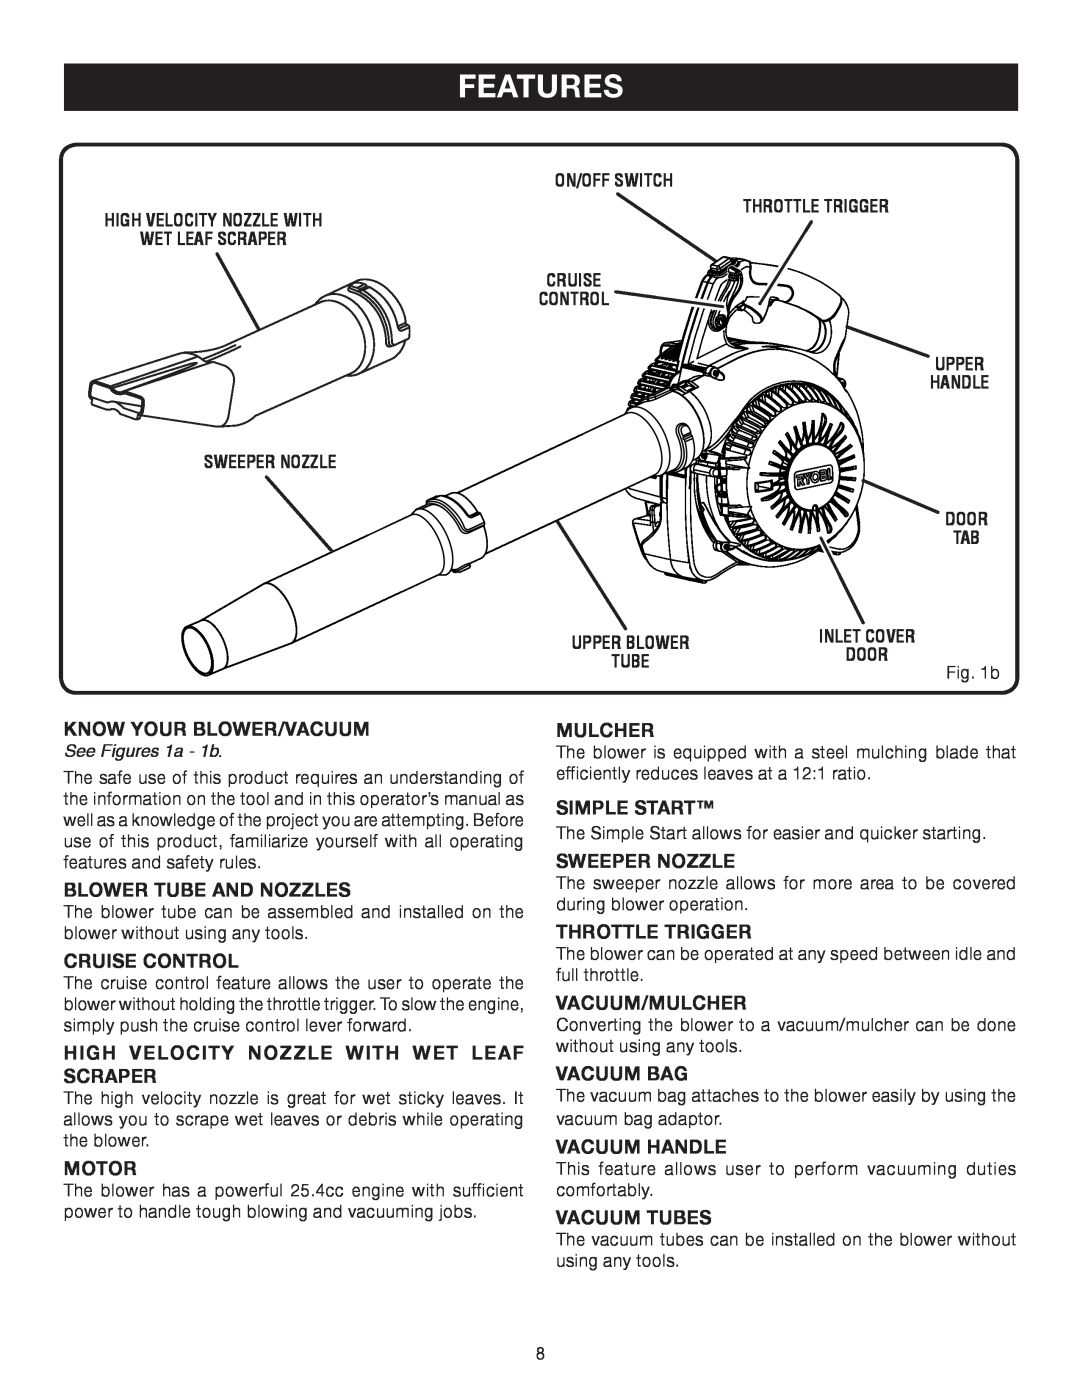 Ryobi RY09907, RY08554 manual Features, KNOW YOUR Blower/vacuum 